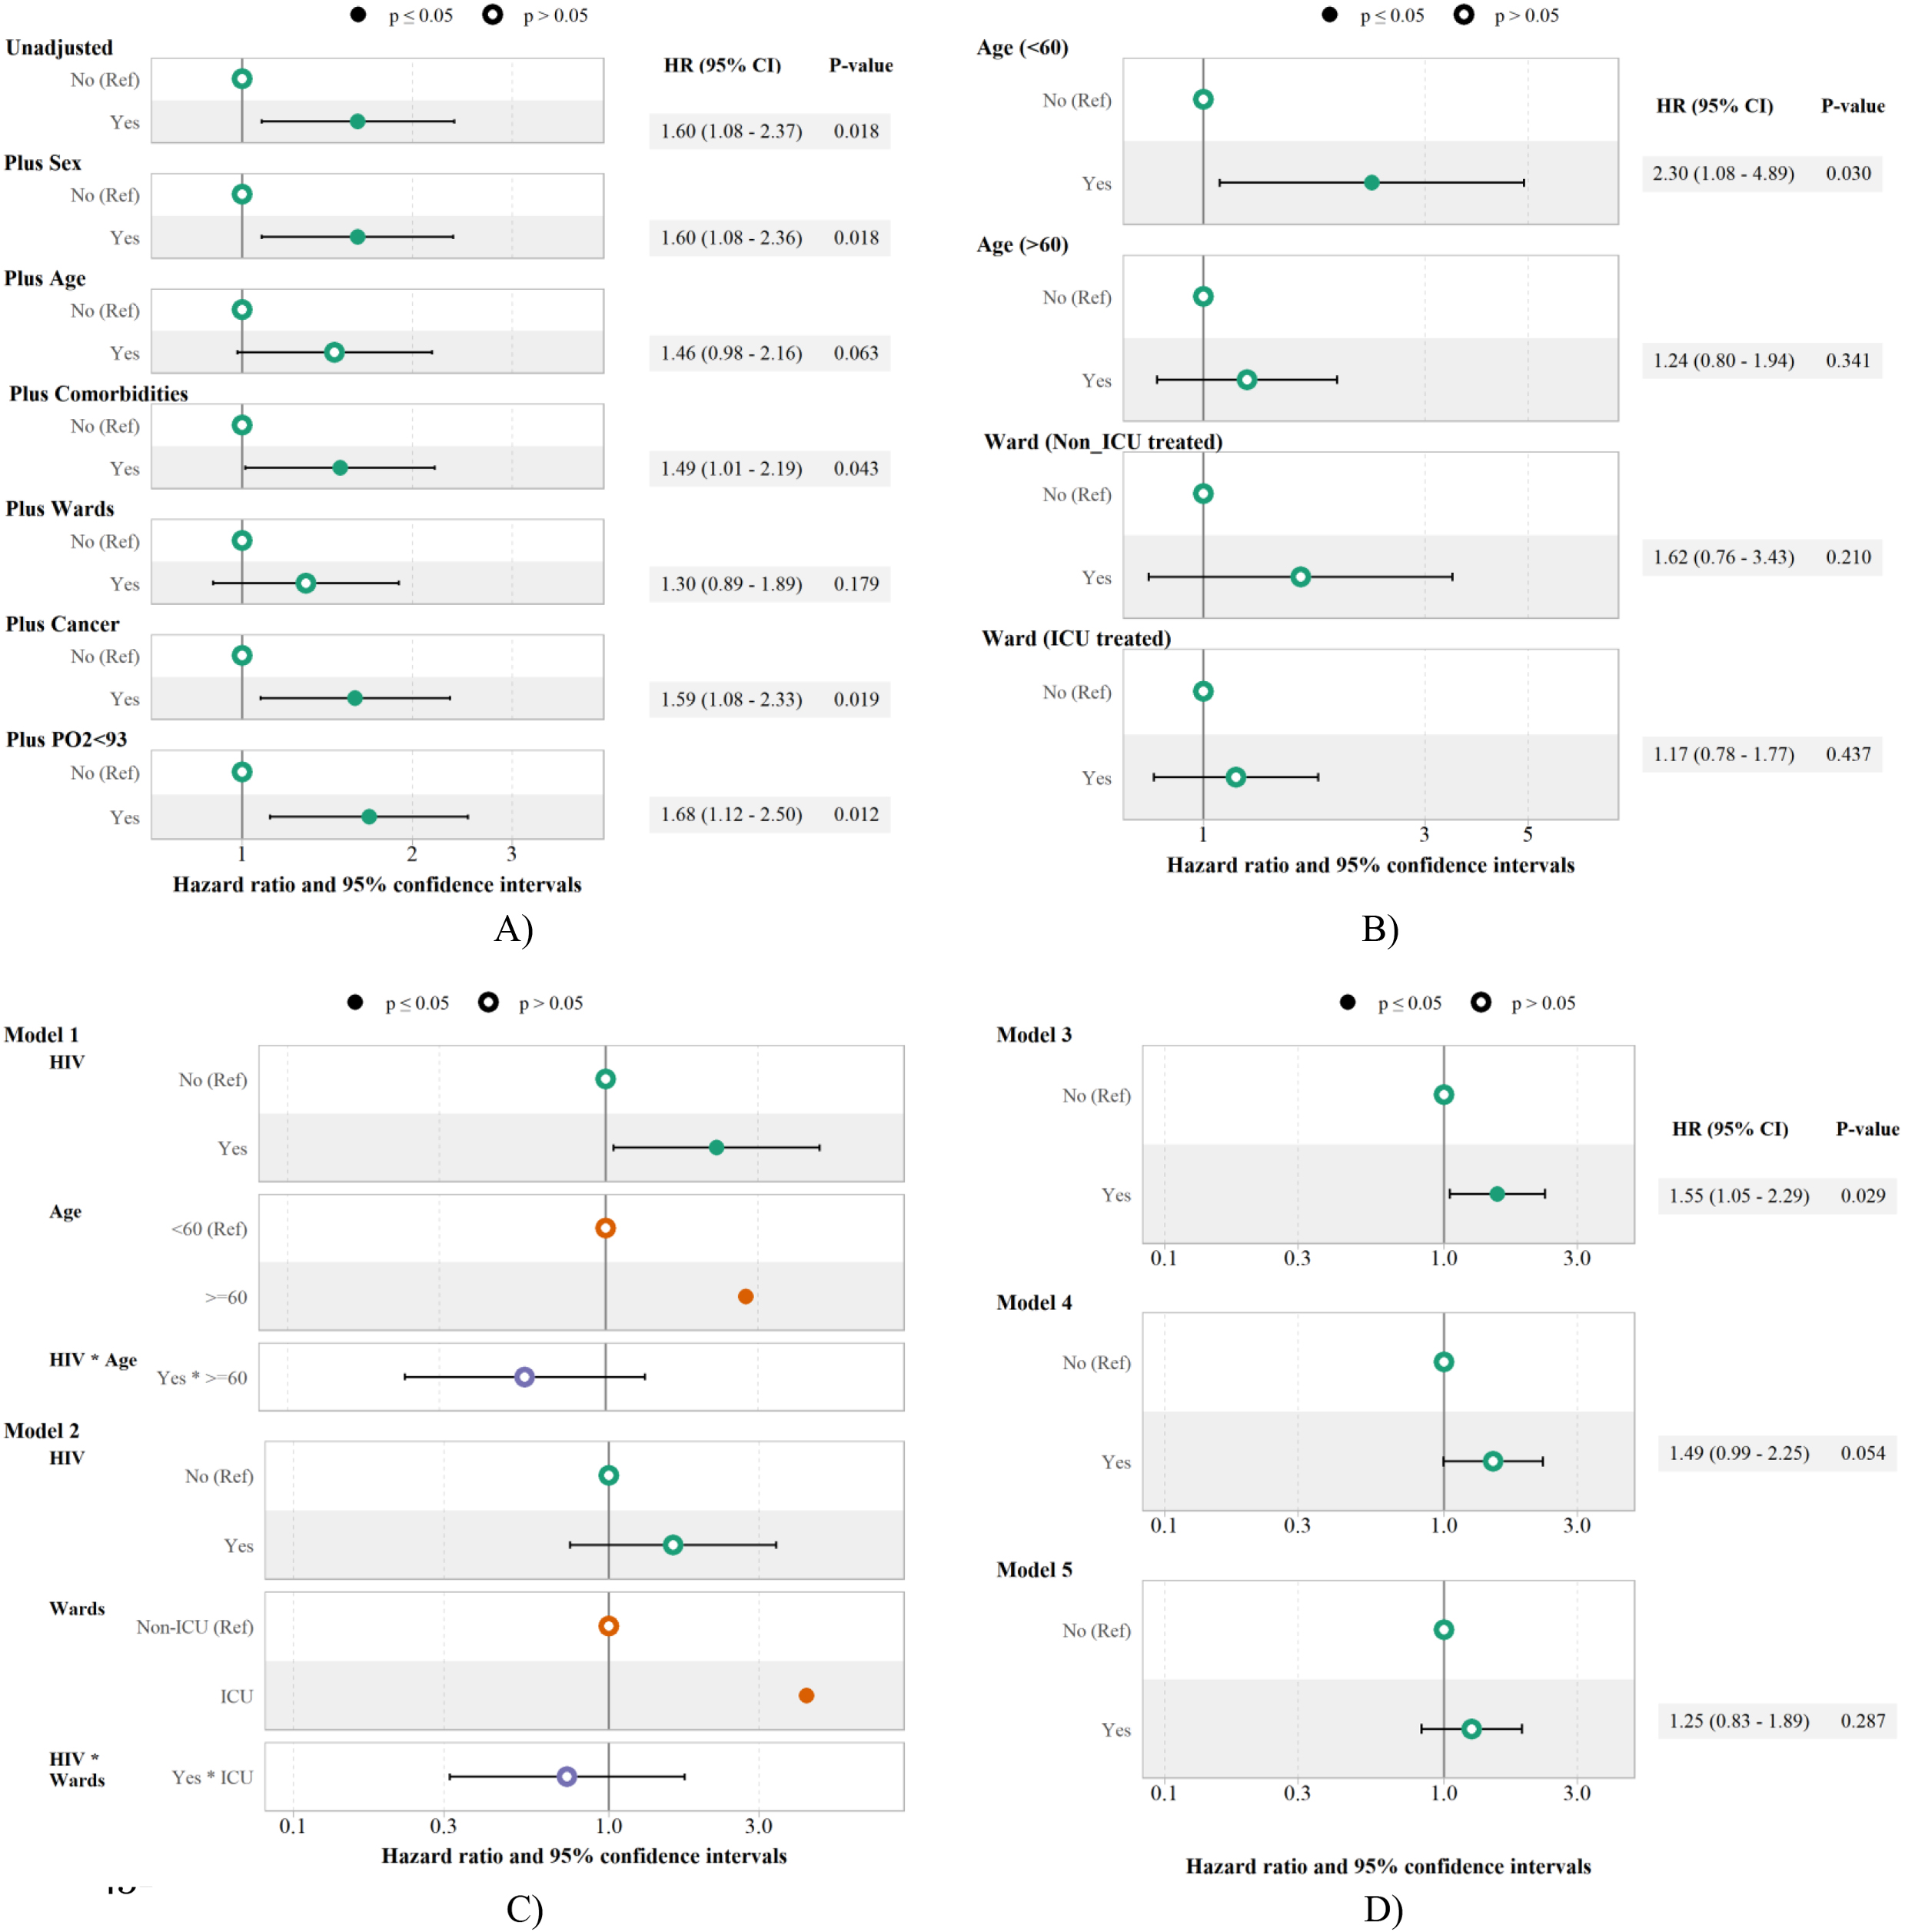 The unadjusted and adjusted HR and 95% CI of death among hospitalized COVID-19 patients with HIV. A) The unadjusted and adjusted Cox regression models, B) The subgroup analysis of HIV impact on the death by age and wards, C) The interaction analysis of HIV-Age (Model 1) and HIV ward (Model2), D) The impact of HIV on the death adjusting for sex, comorbidity, cancer, PO2 < 93 (model 3), age, sex, comorbidity, cancer, PO2 < 93 (model 4), and all age, sex, comorbidity, ward, cancer, PO2 < 93 (model 5).